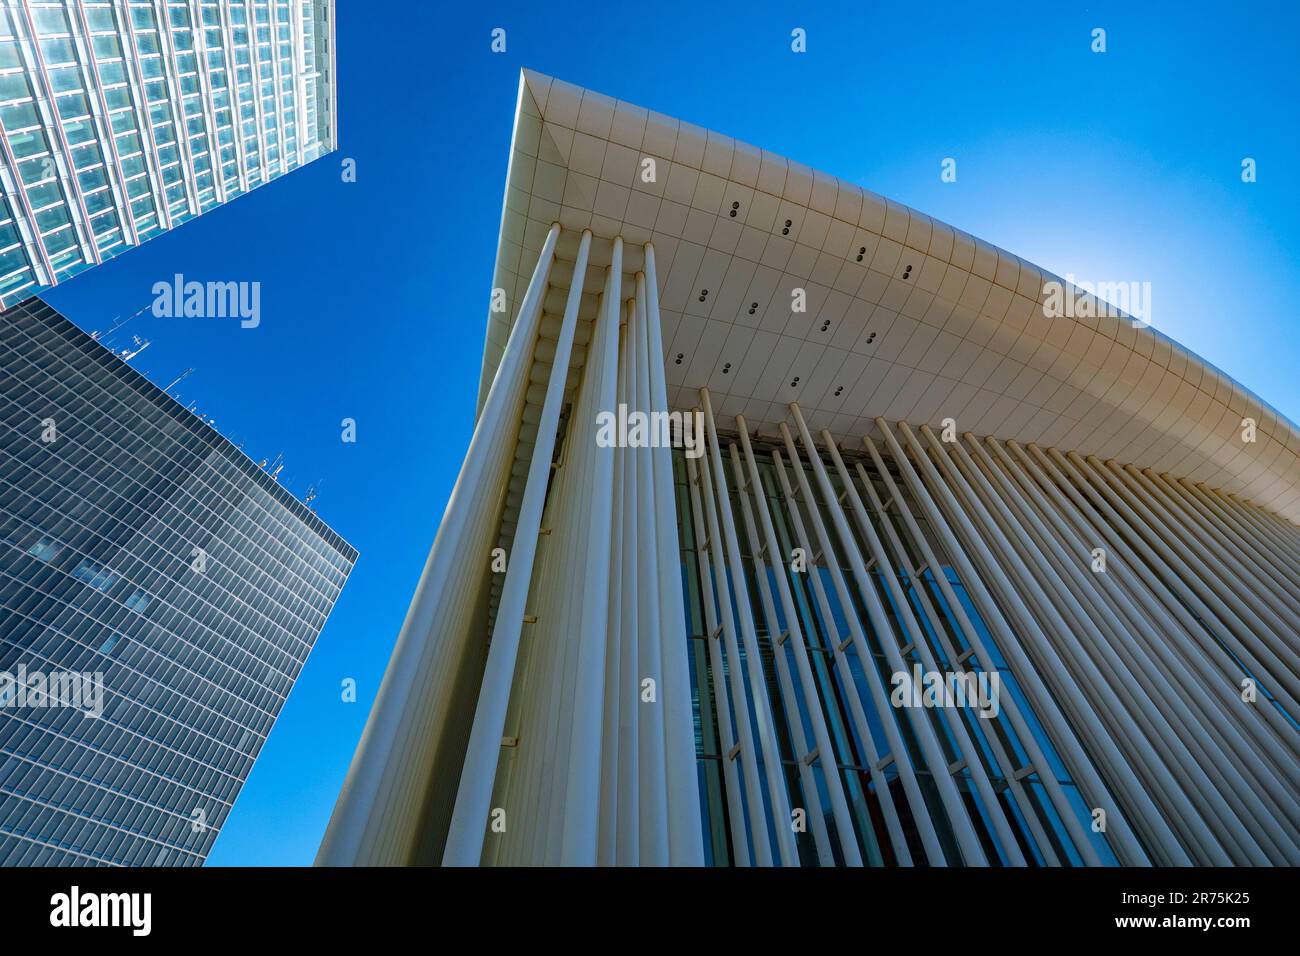 New Philharmonic Hall, Kirchberg, Luxembourg City, Benelux, pays du Benelux, Luxembourg Banque D'Images